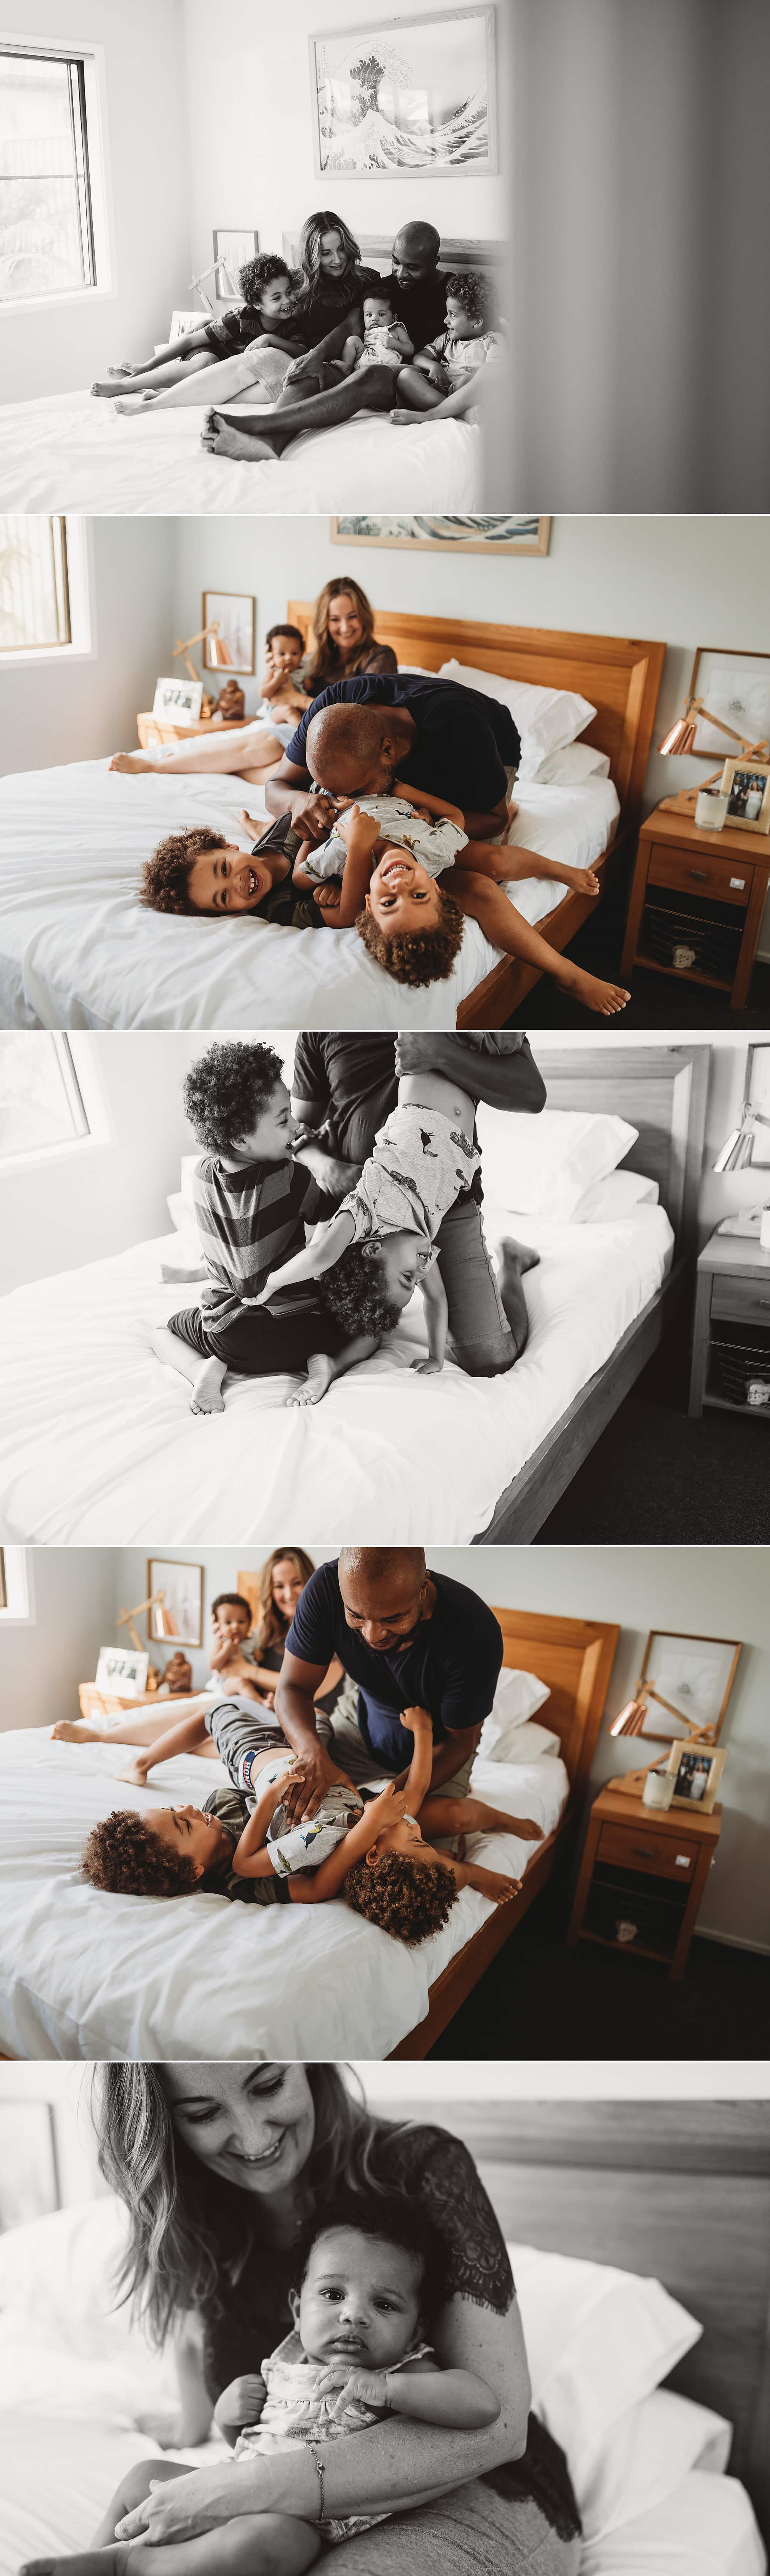 Fun-in-home-family-photography-sydney-sutherland-shire